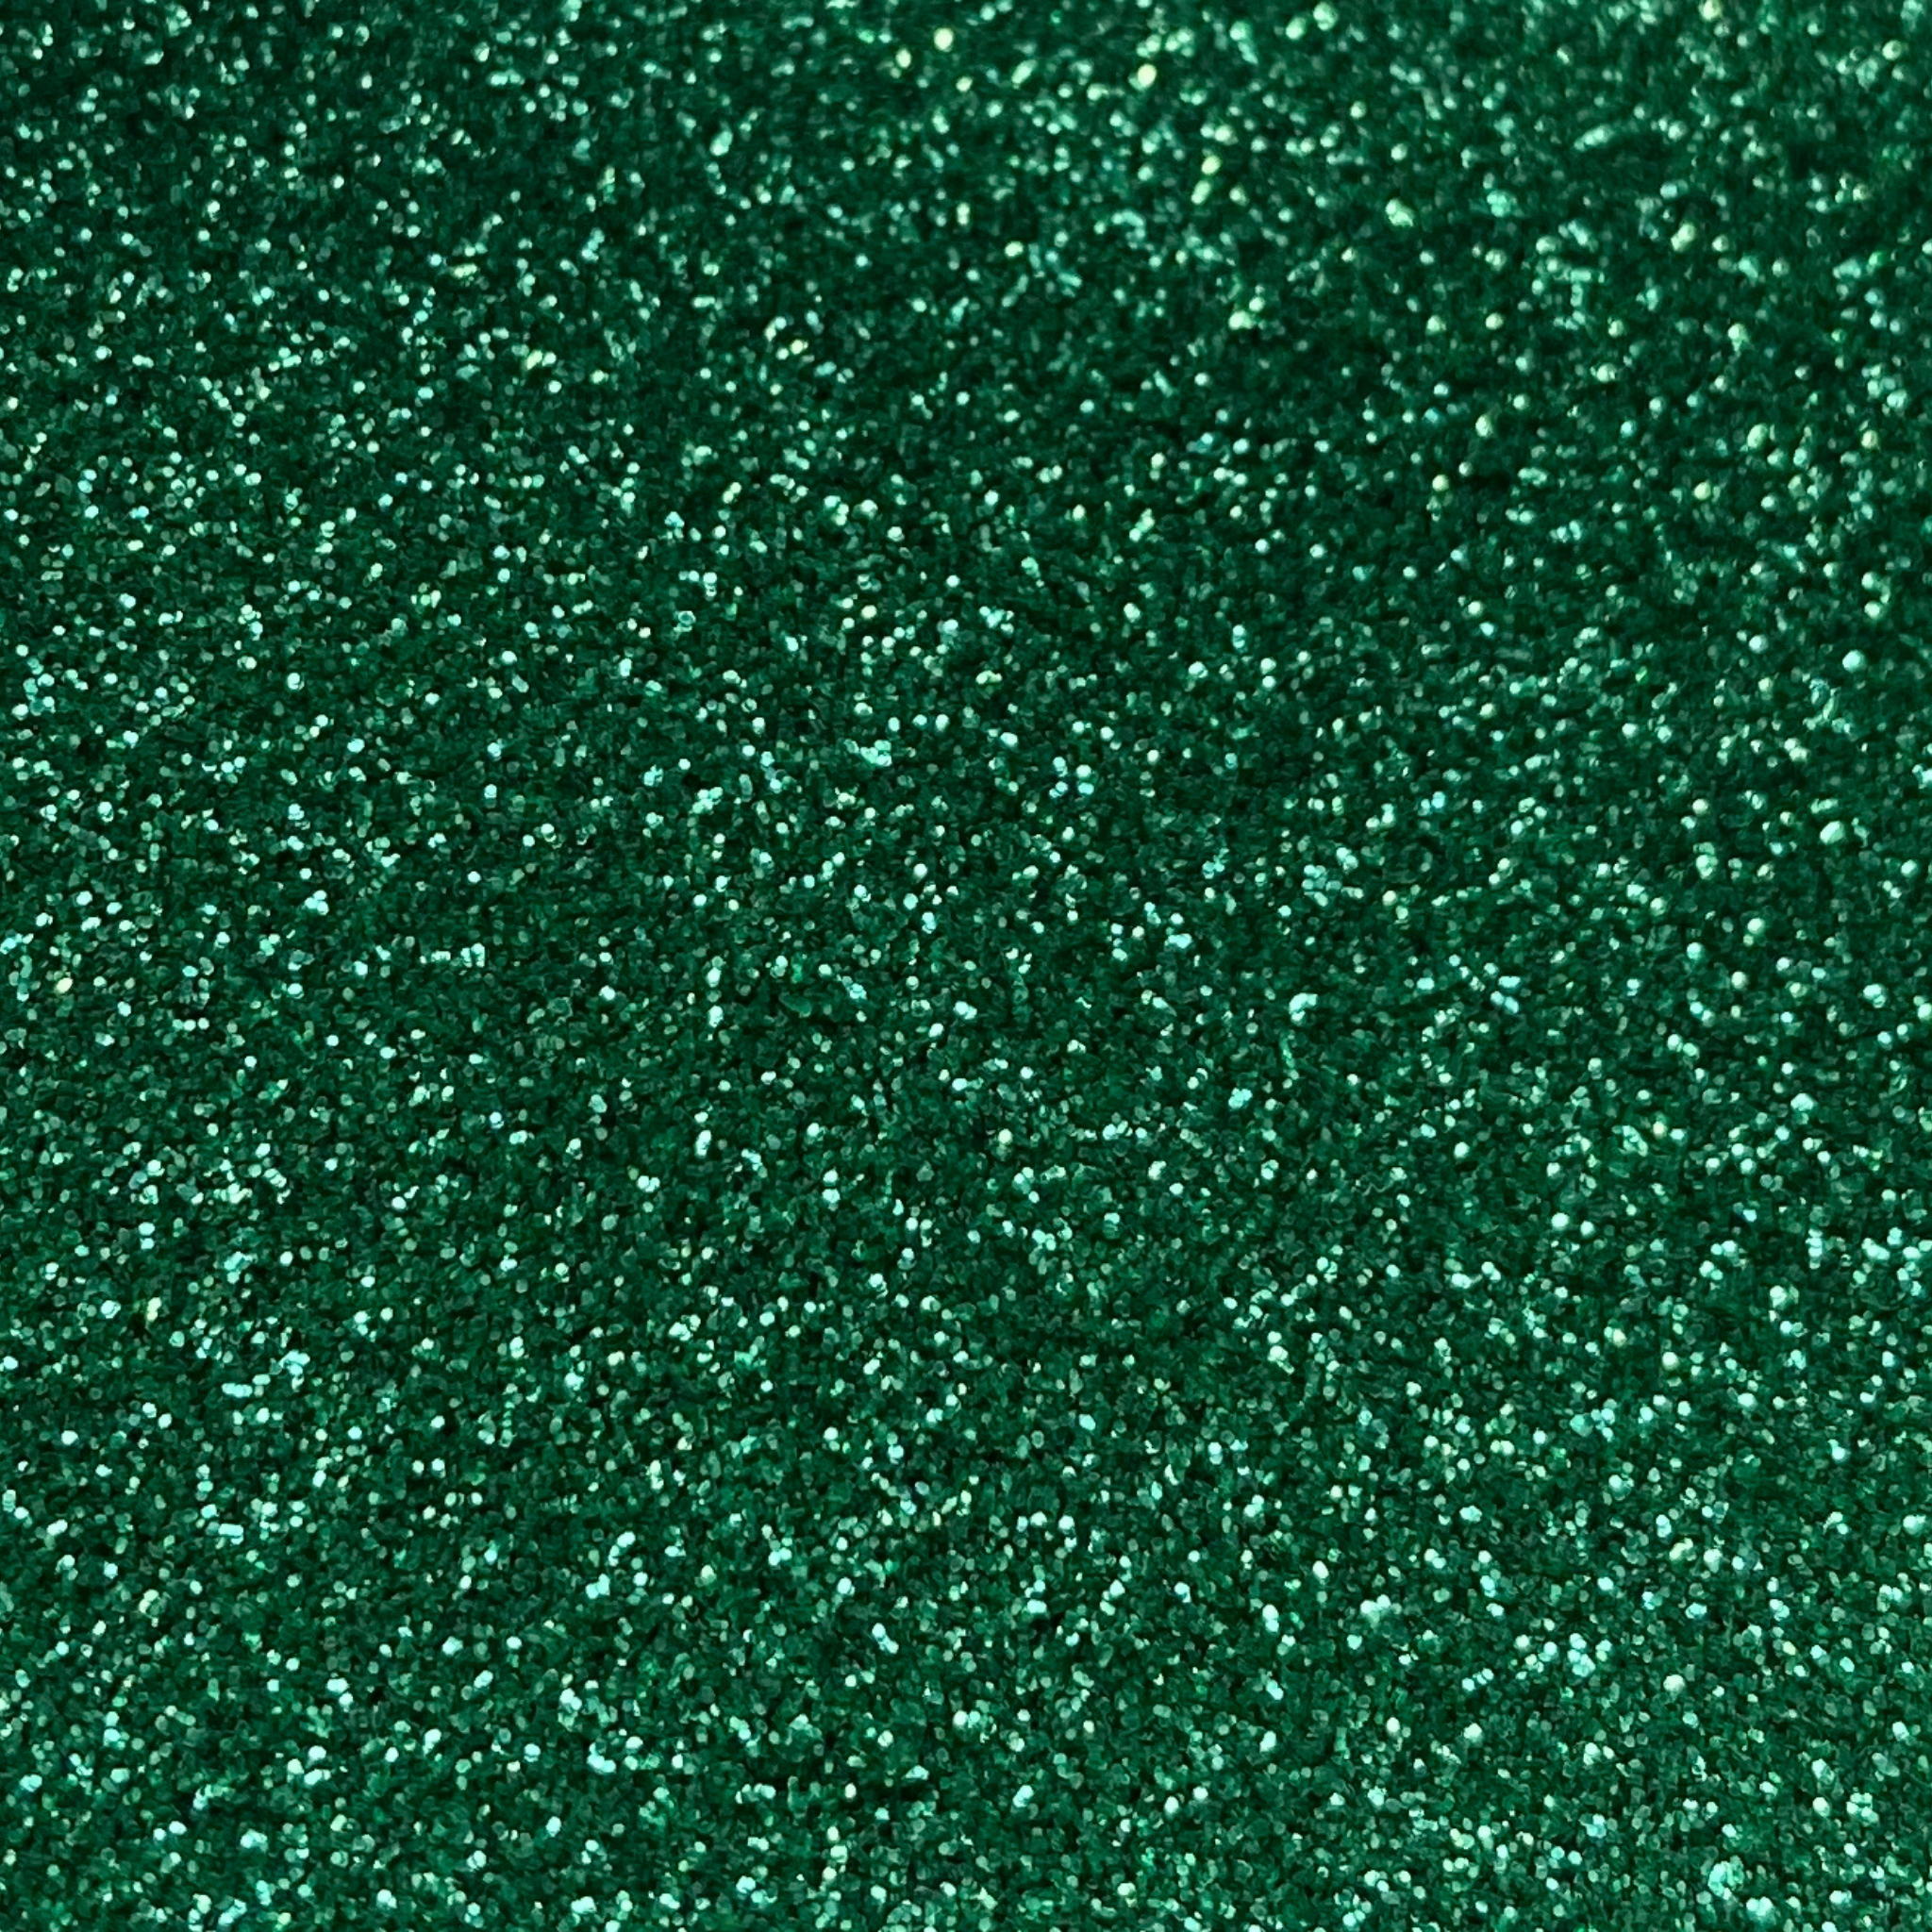 Green fine biodegradable glitter for cosmetics and makeup looks